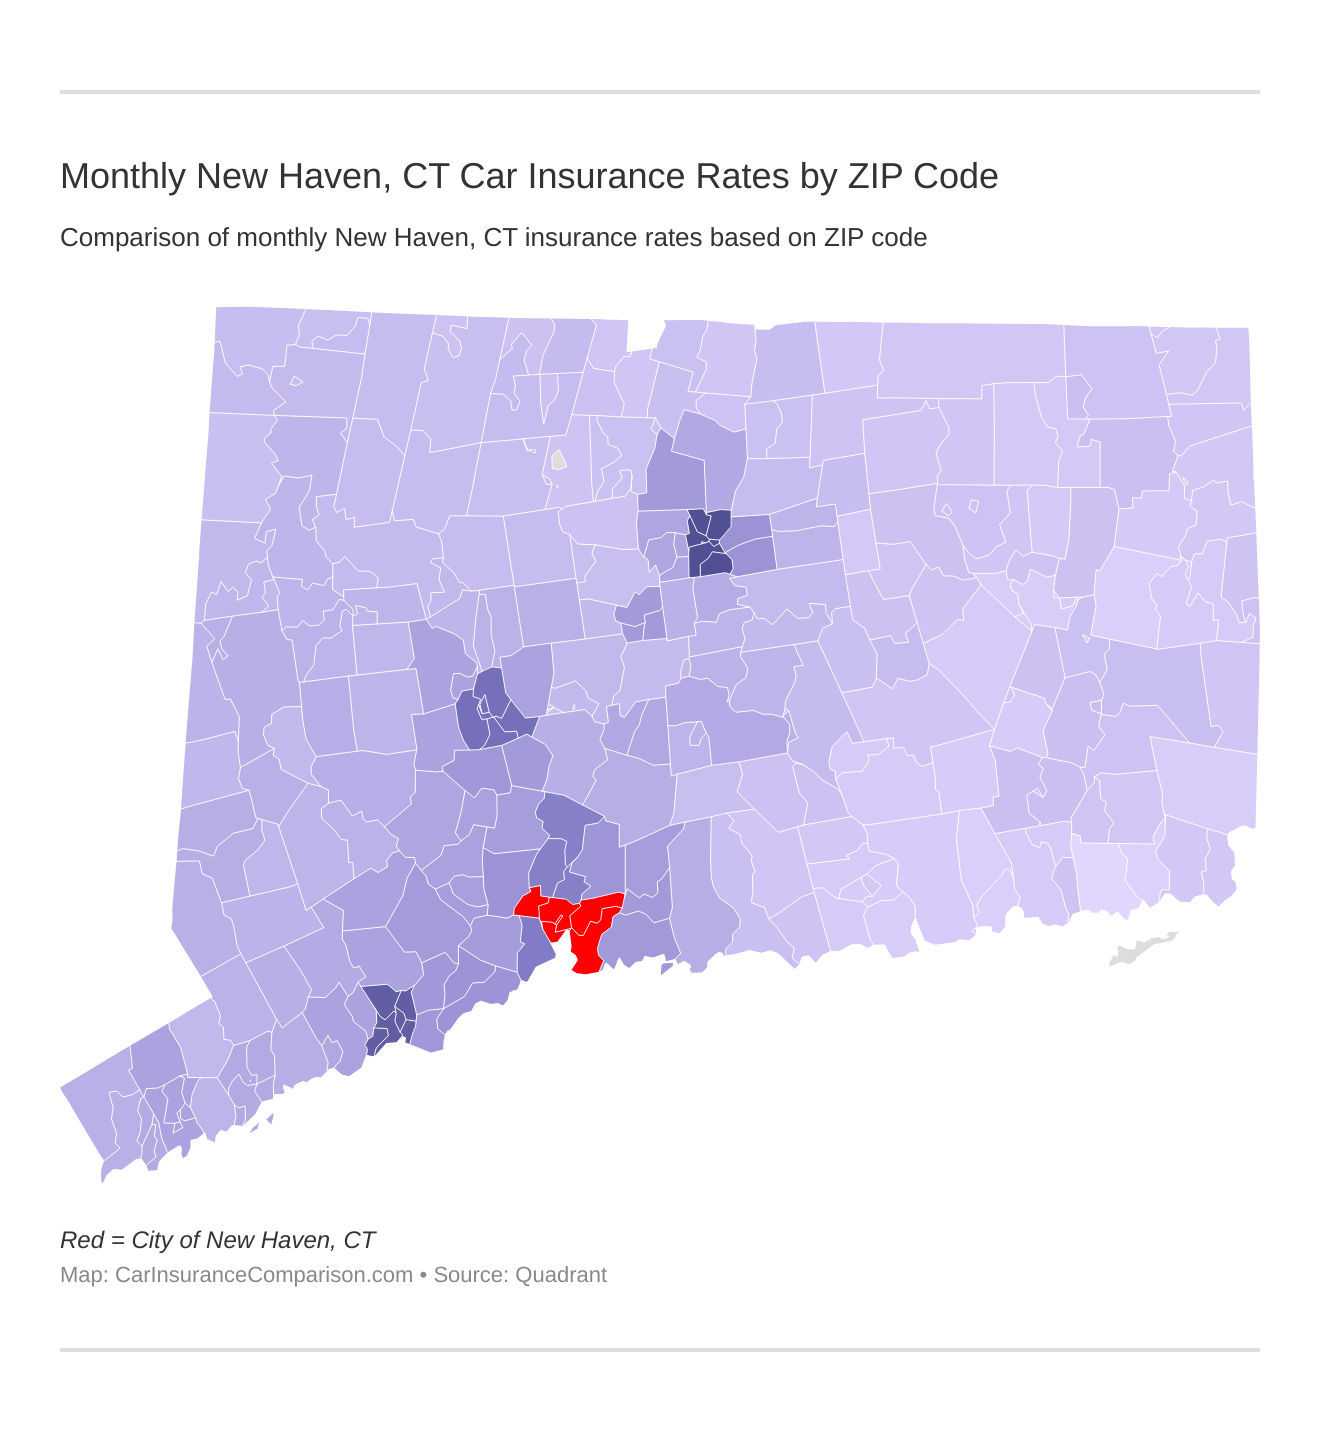 Monthly New Haven, CT Car Insurance Rates by ZIP Code